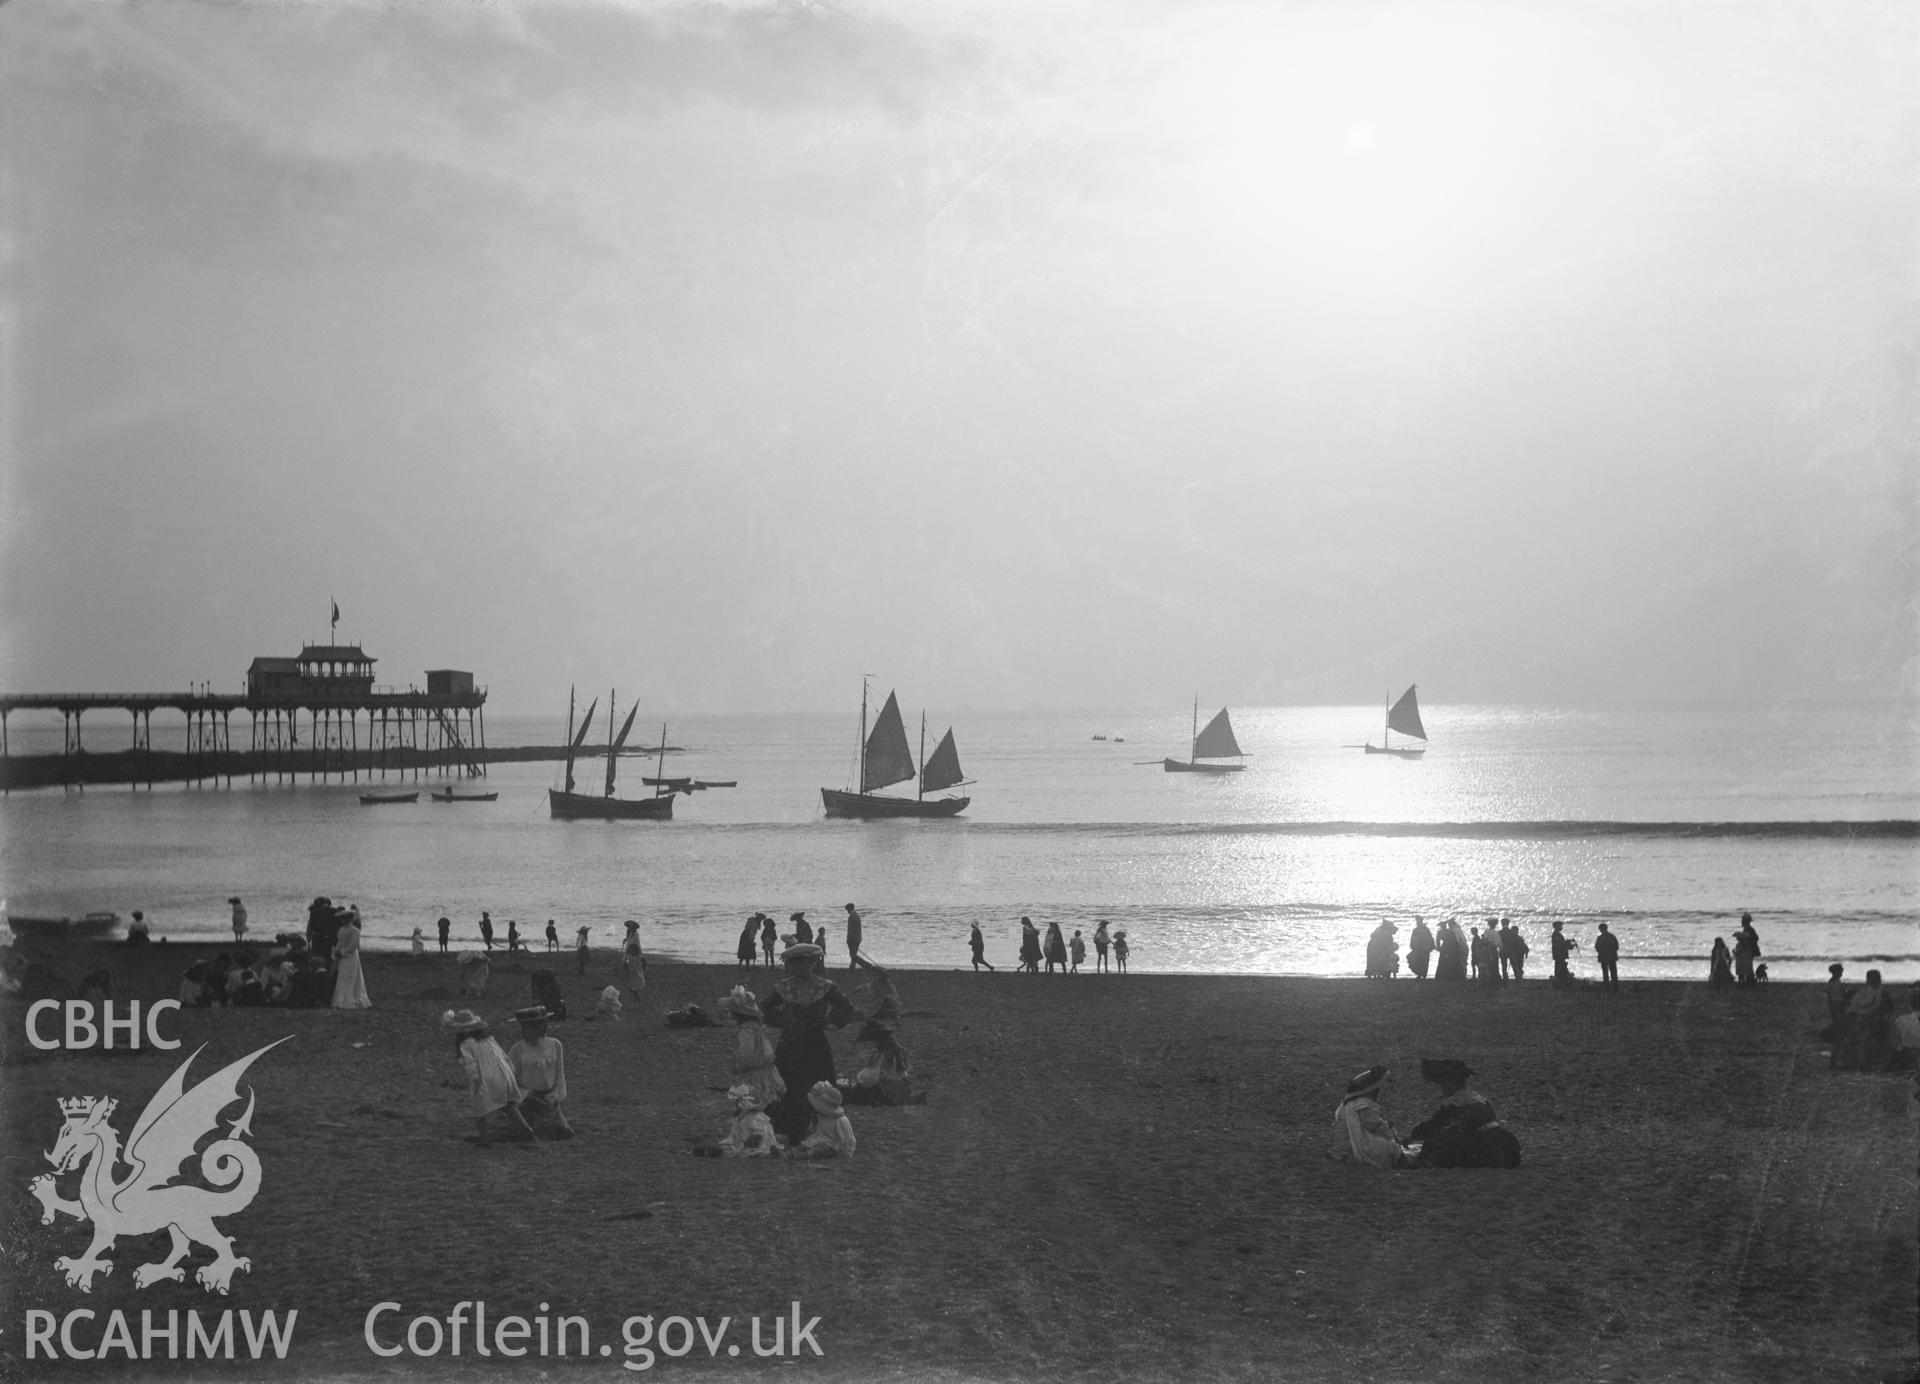 Black and white image dating from c.1910 showing a busy beach scene at Aberystwyth with the Pier in the background.